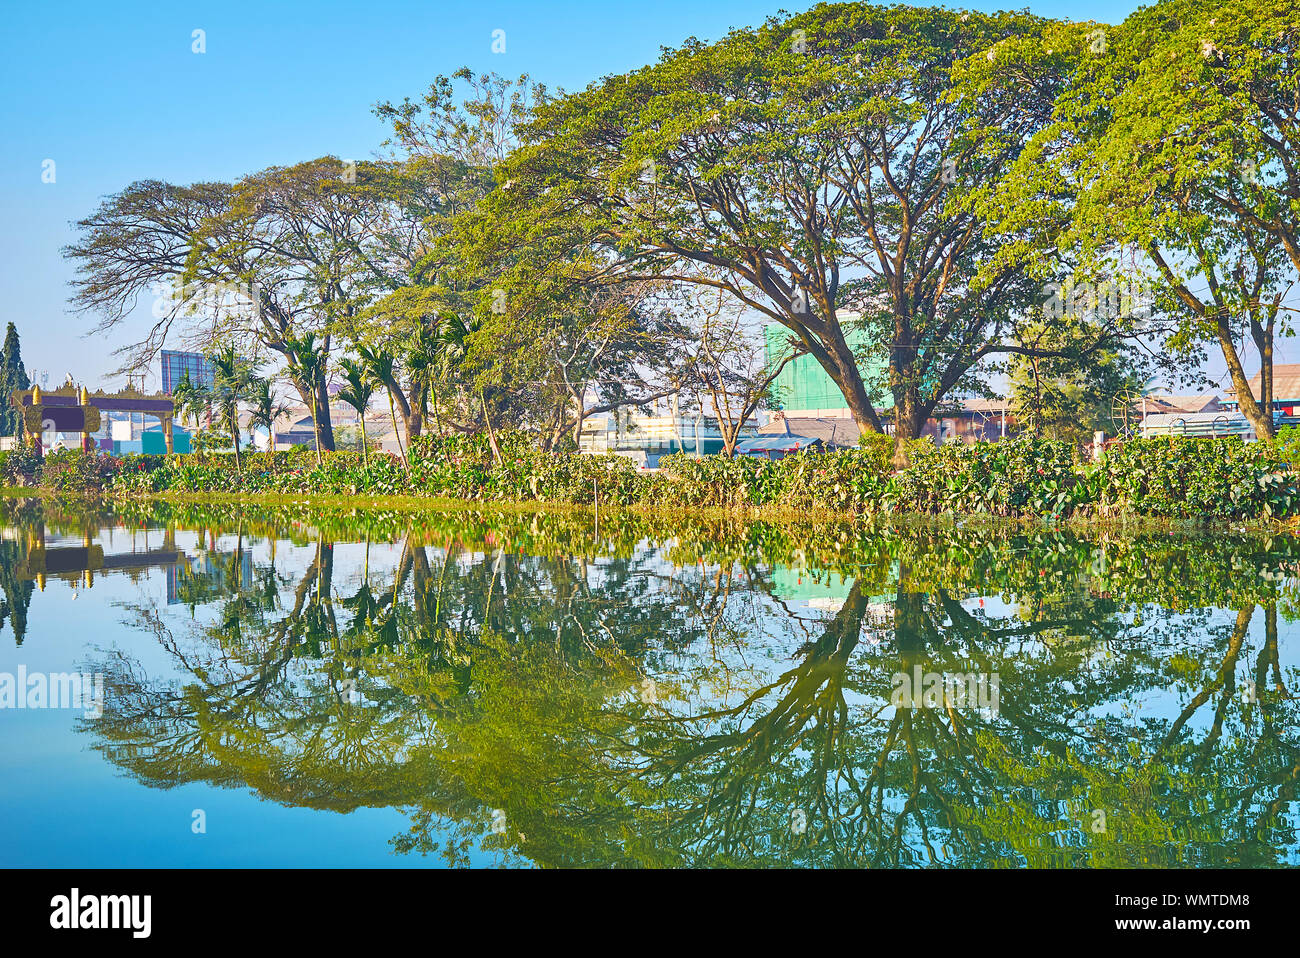 Enjoy the morning walk by the Tharzi pond with a view on shady spread trees along its bank, Nyaungshwe, Myanmar Stock Photo